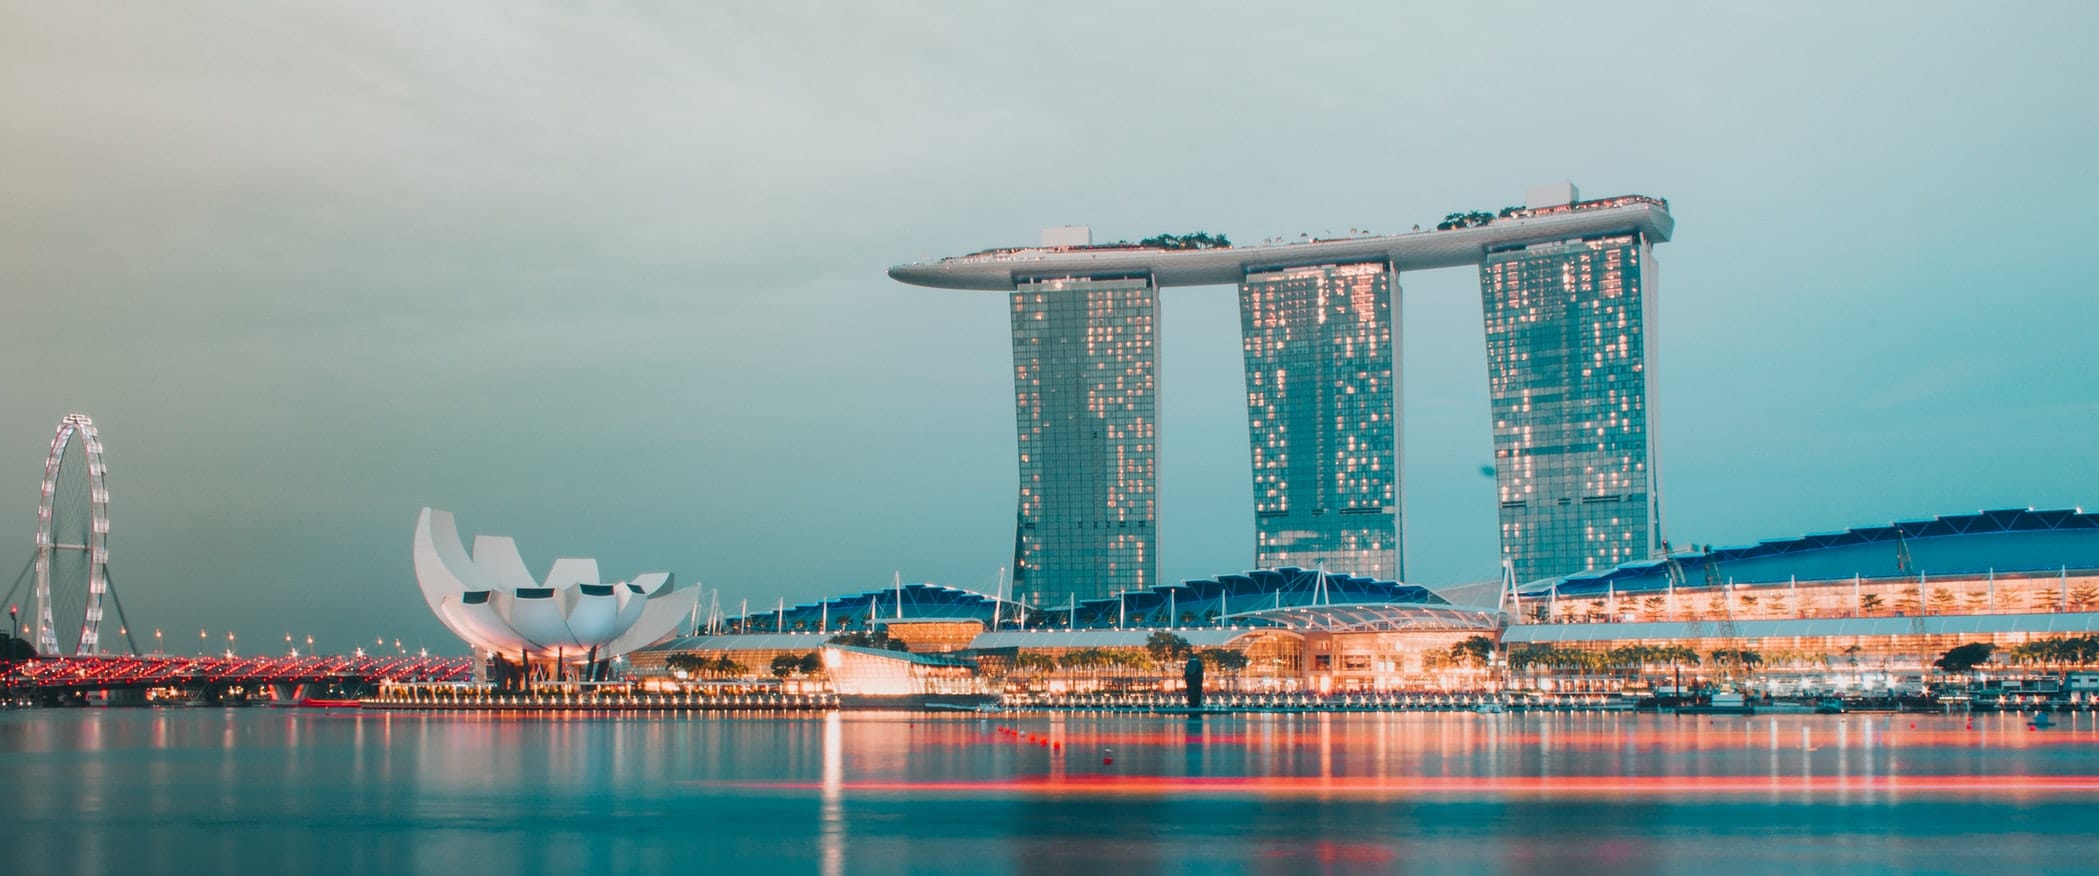 Asian Crystallography Association 2019 meeting is held in Singapour